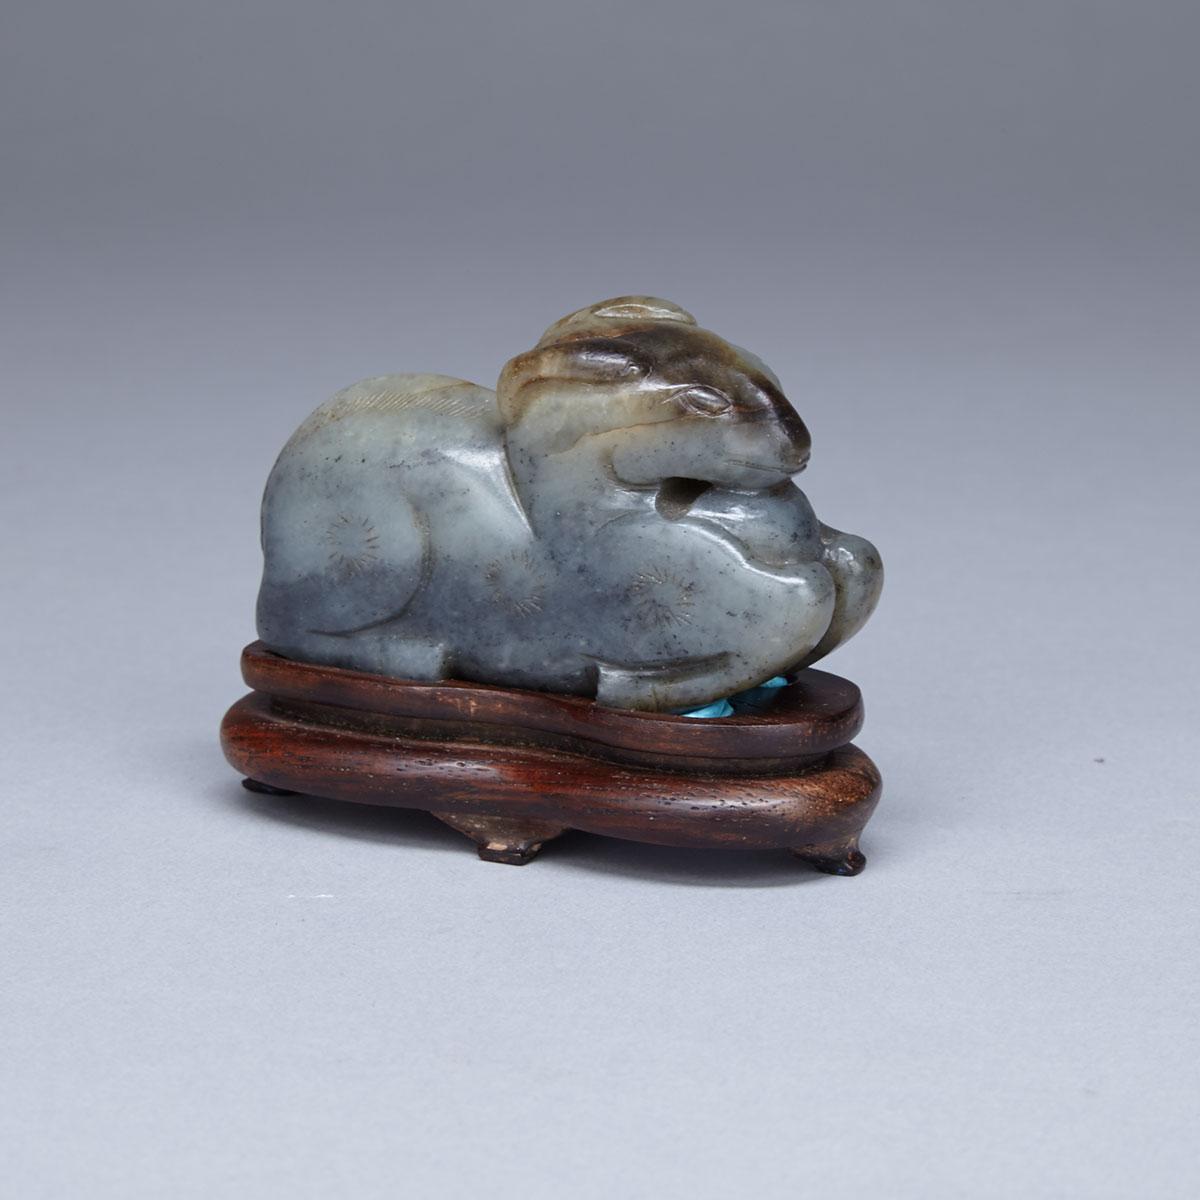 Greyish Jade Carving of a Recumbent Goat, 16th/17th Century